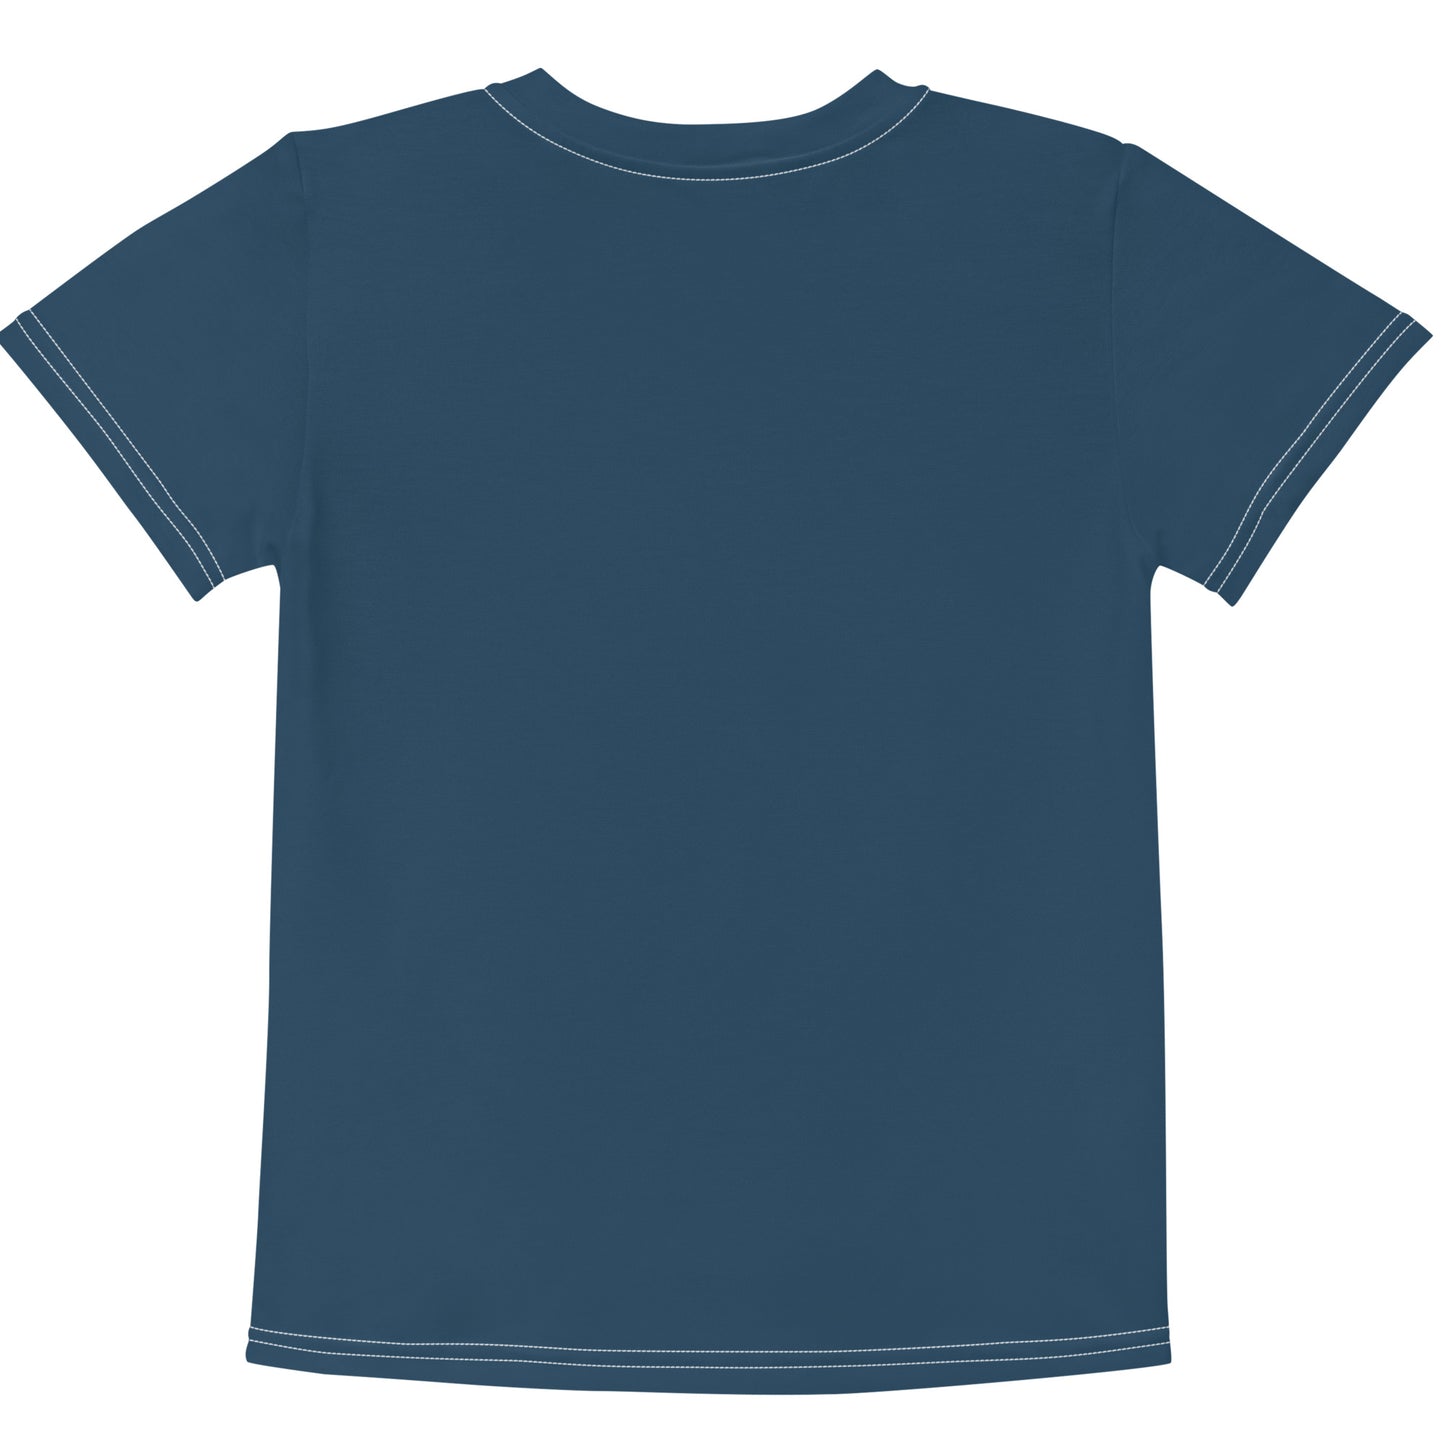 Ocean Blue Climate Change Global Warming Statement - Sustainably Made Kids crew neck t-shirt